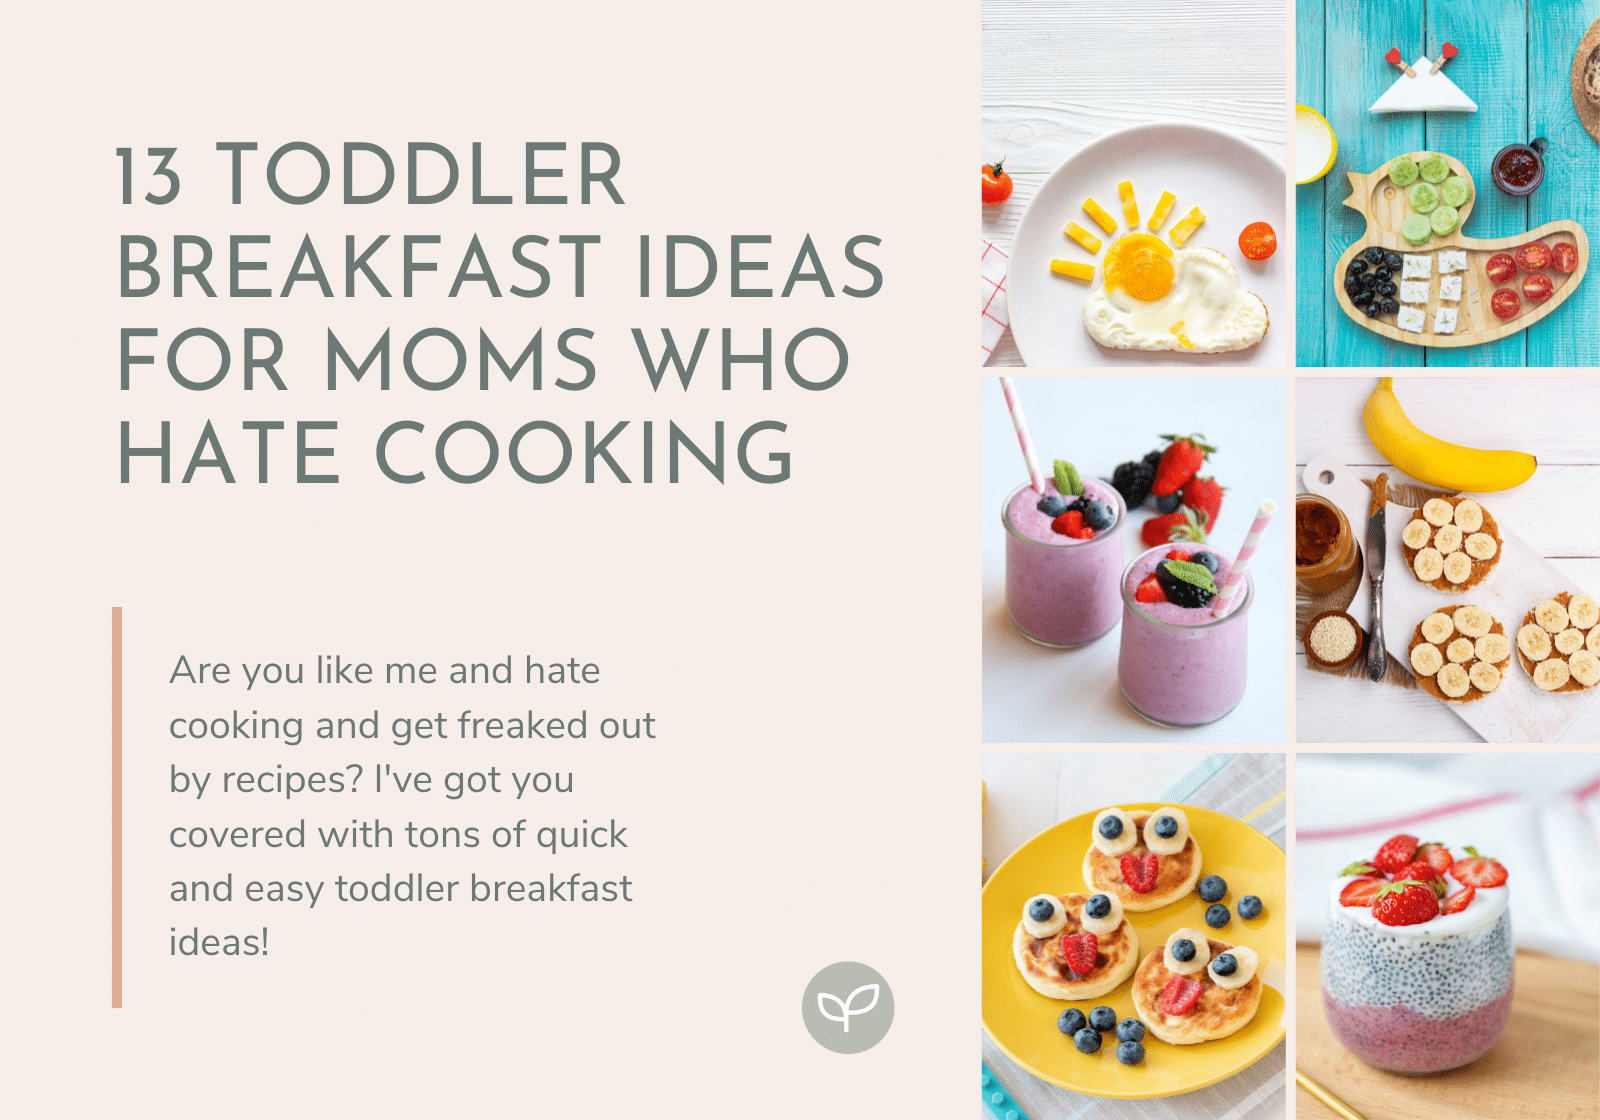 Toddler Breakfast Ideas featured image